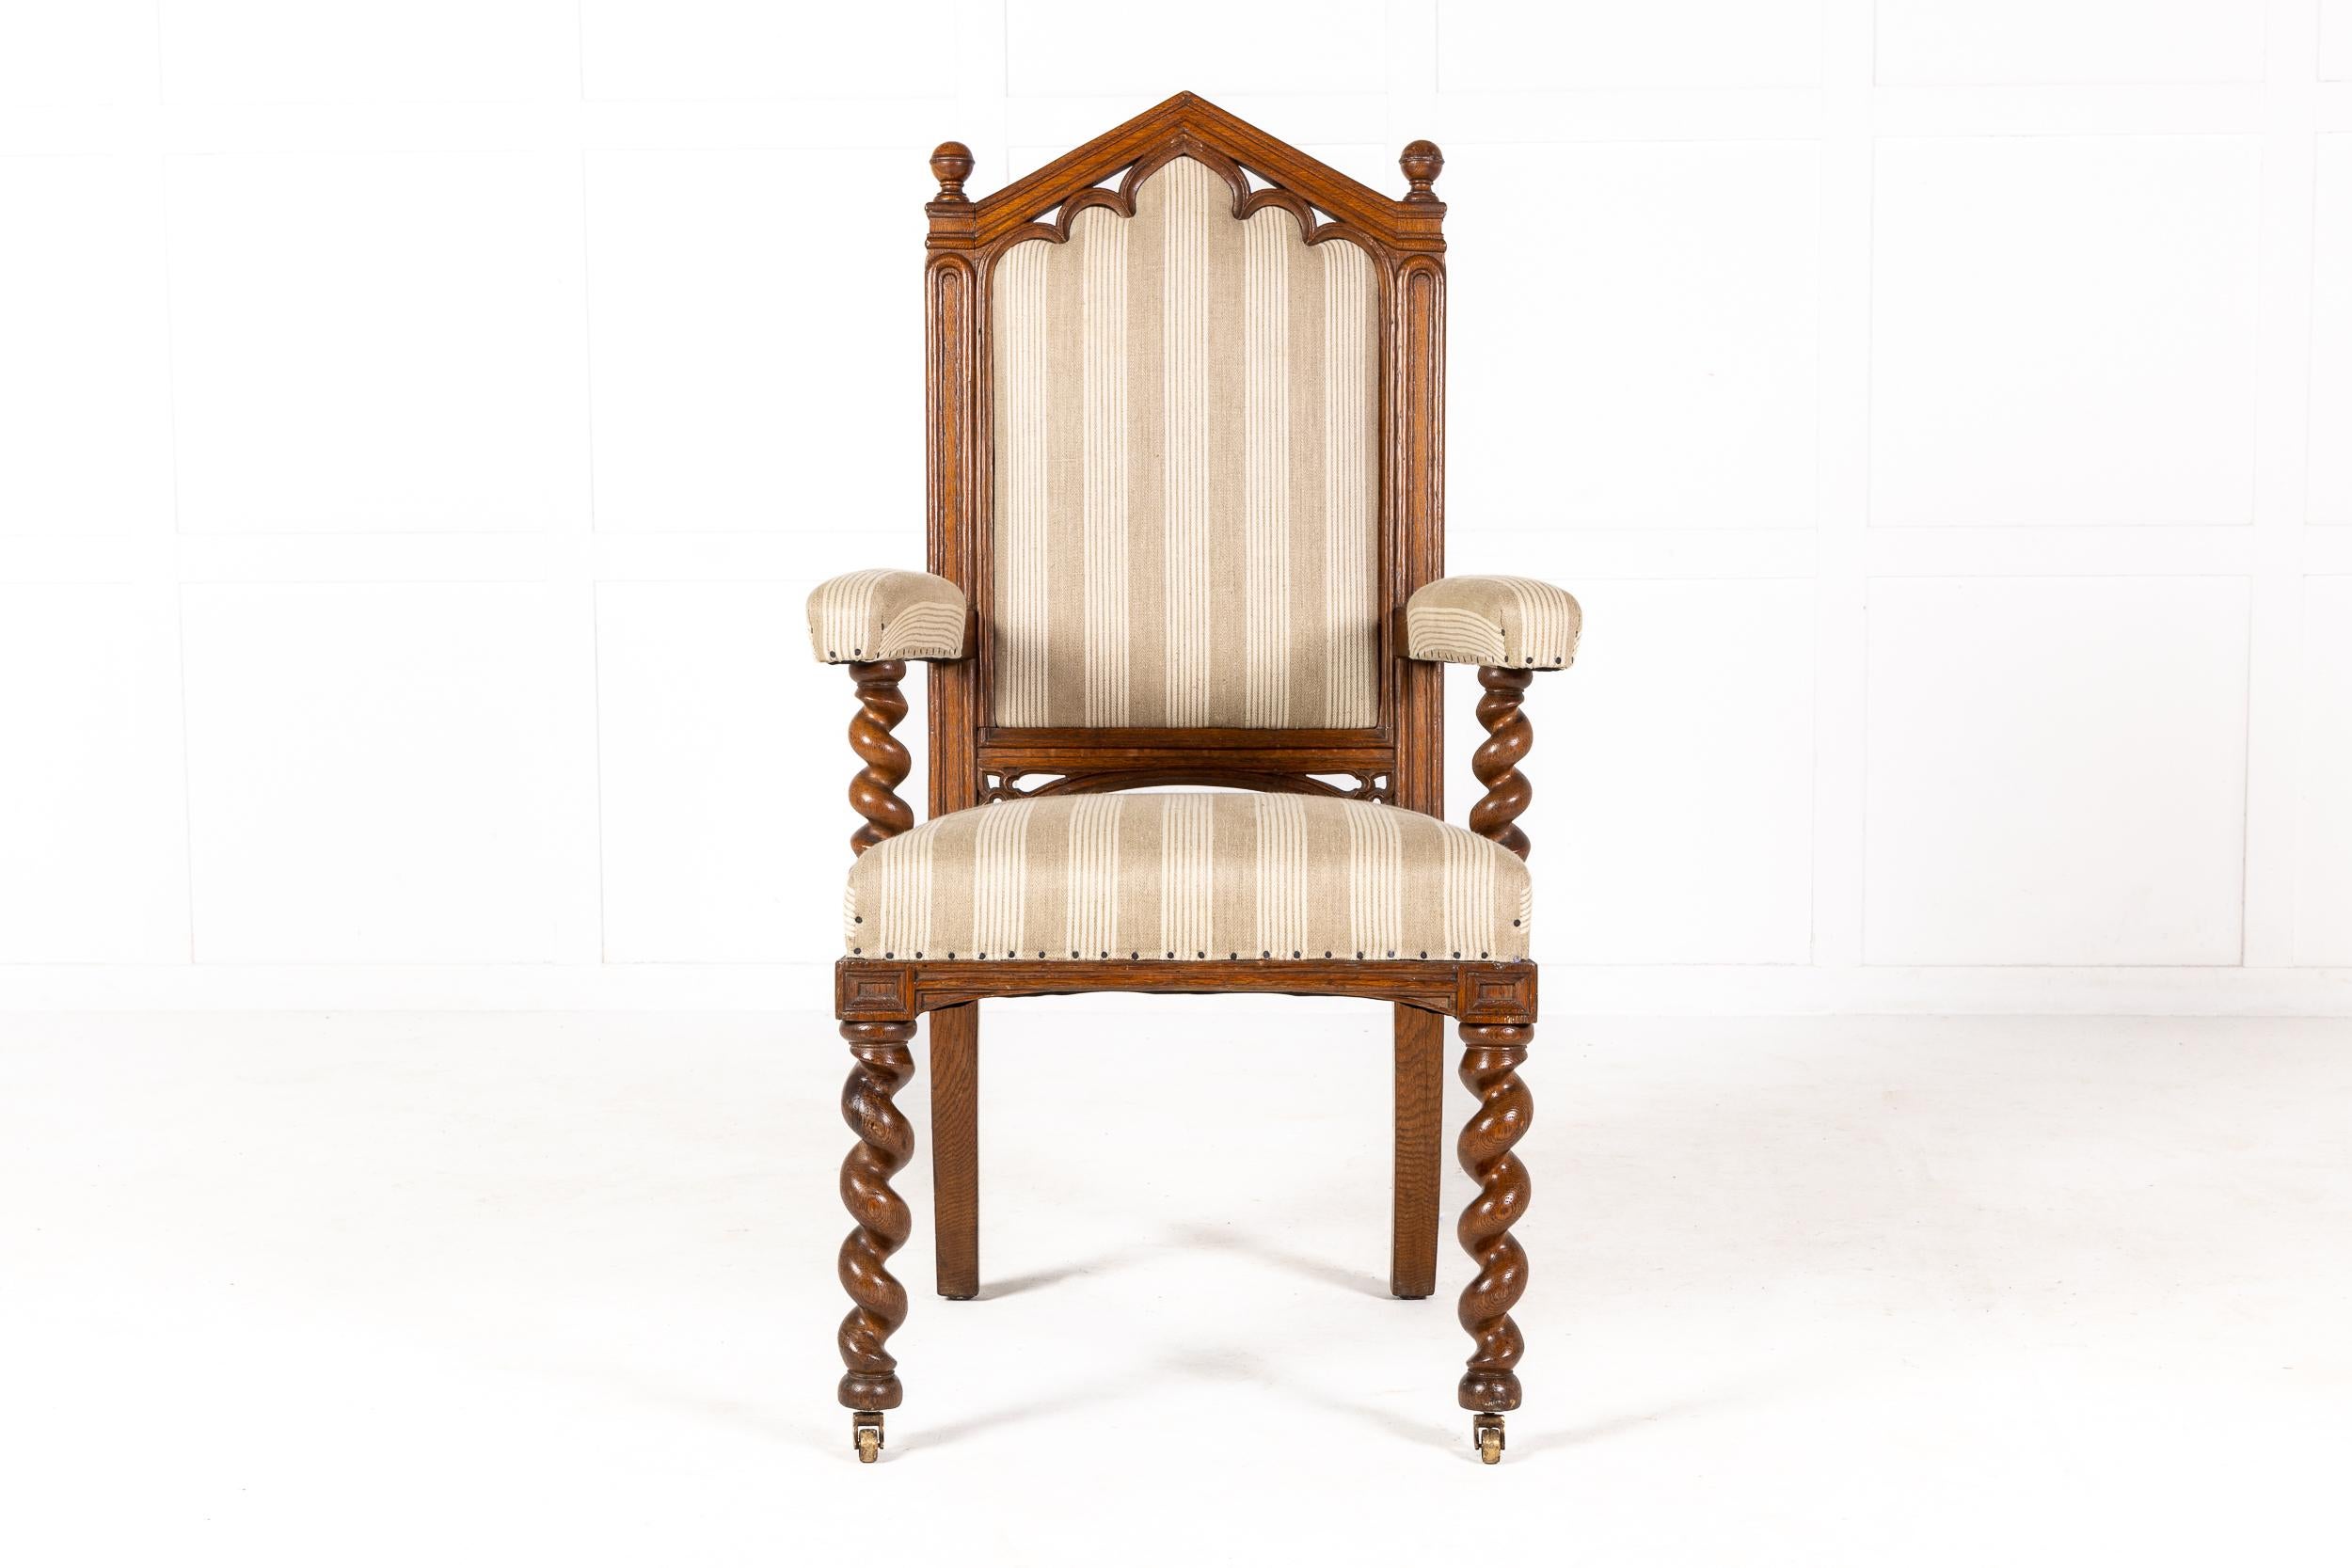 19th century English oak gothic armchair carved in solid oak. Having a typically angled, pointed arch over its high back with traditional gothic arches and finials. Good deep proportions having a padded back with inset and padded armrests with